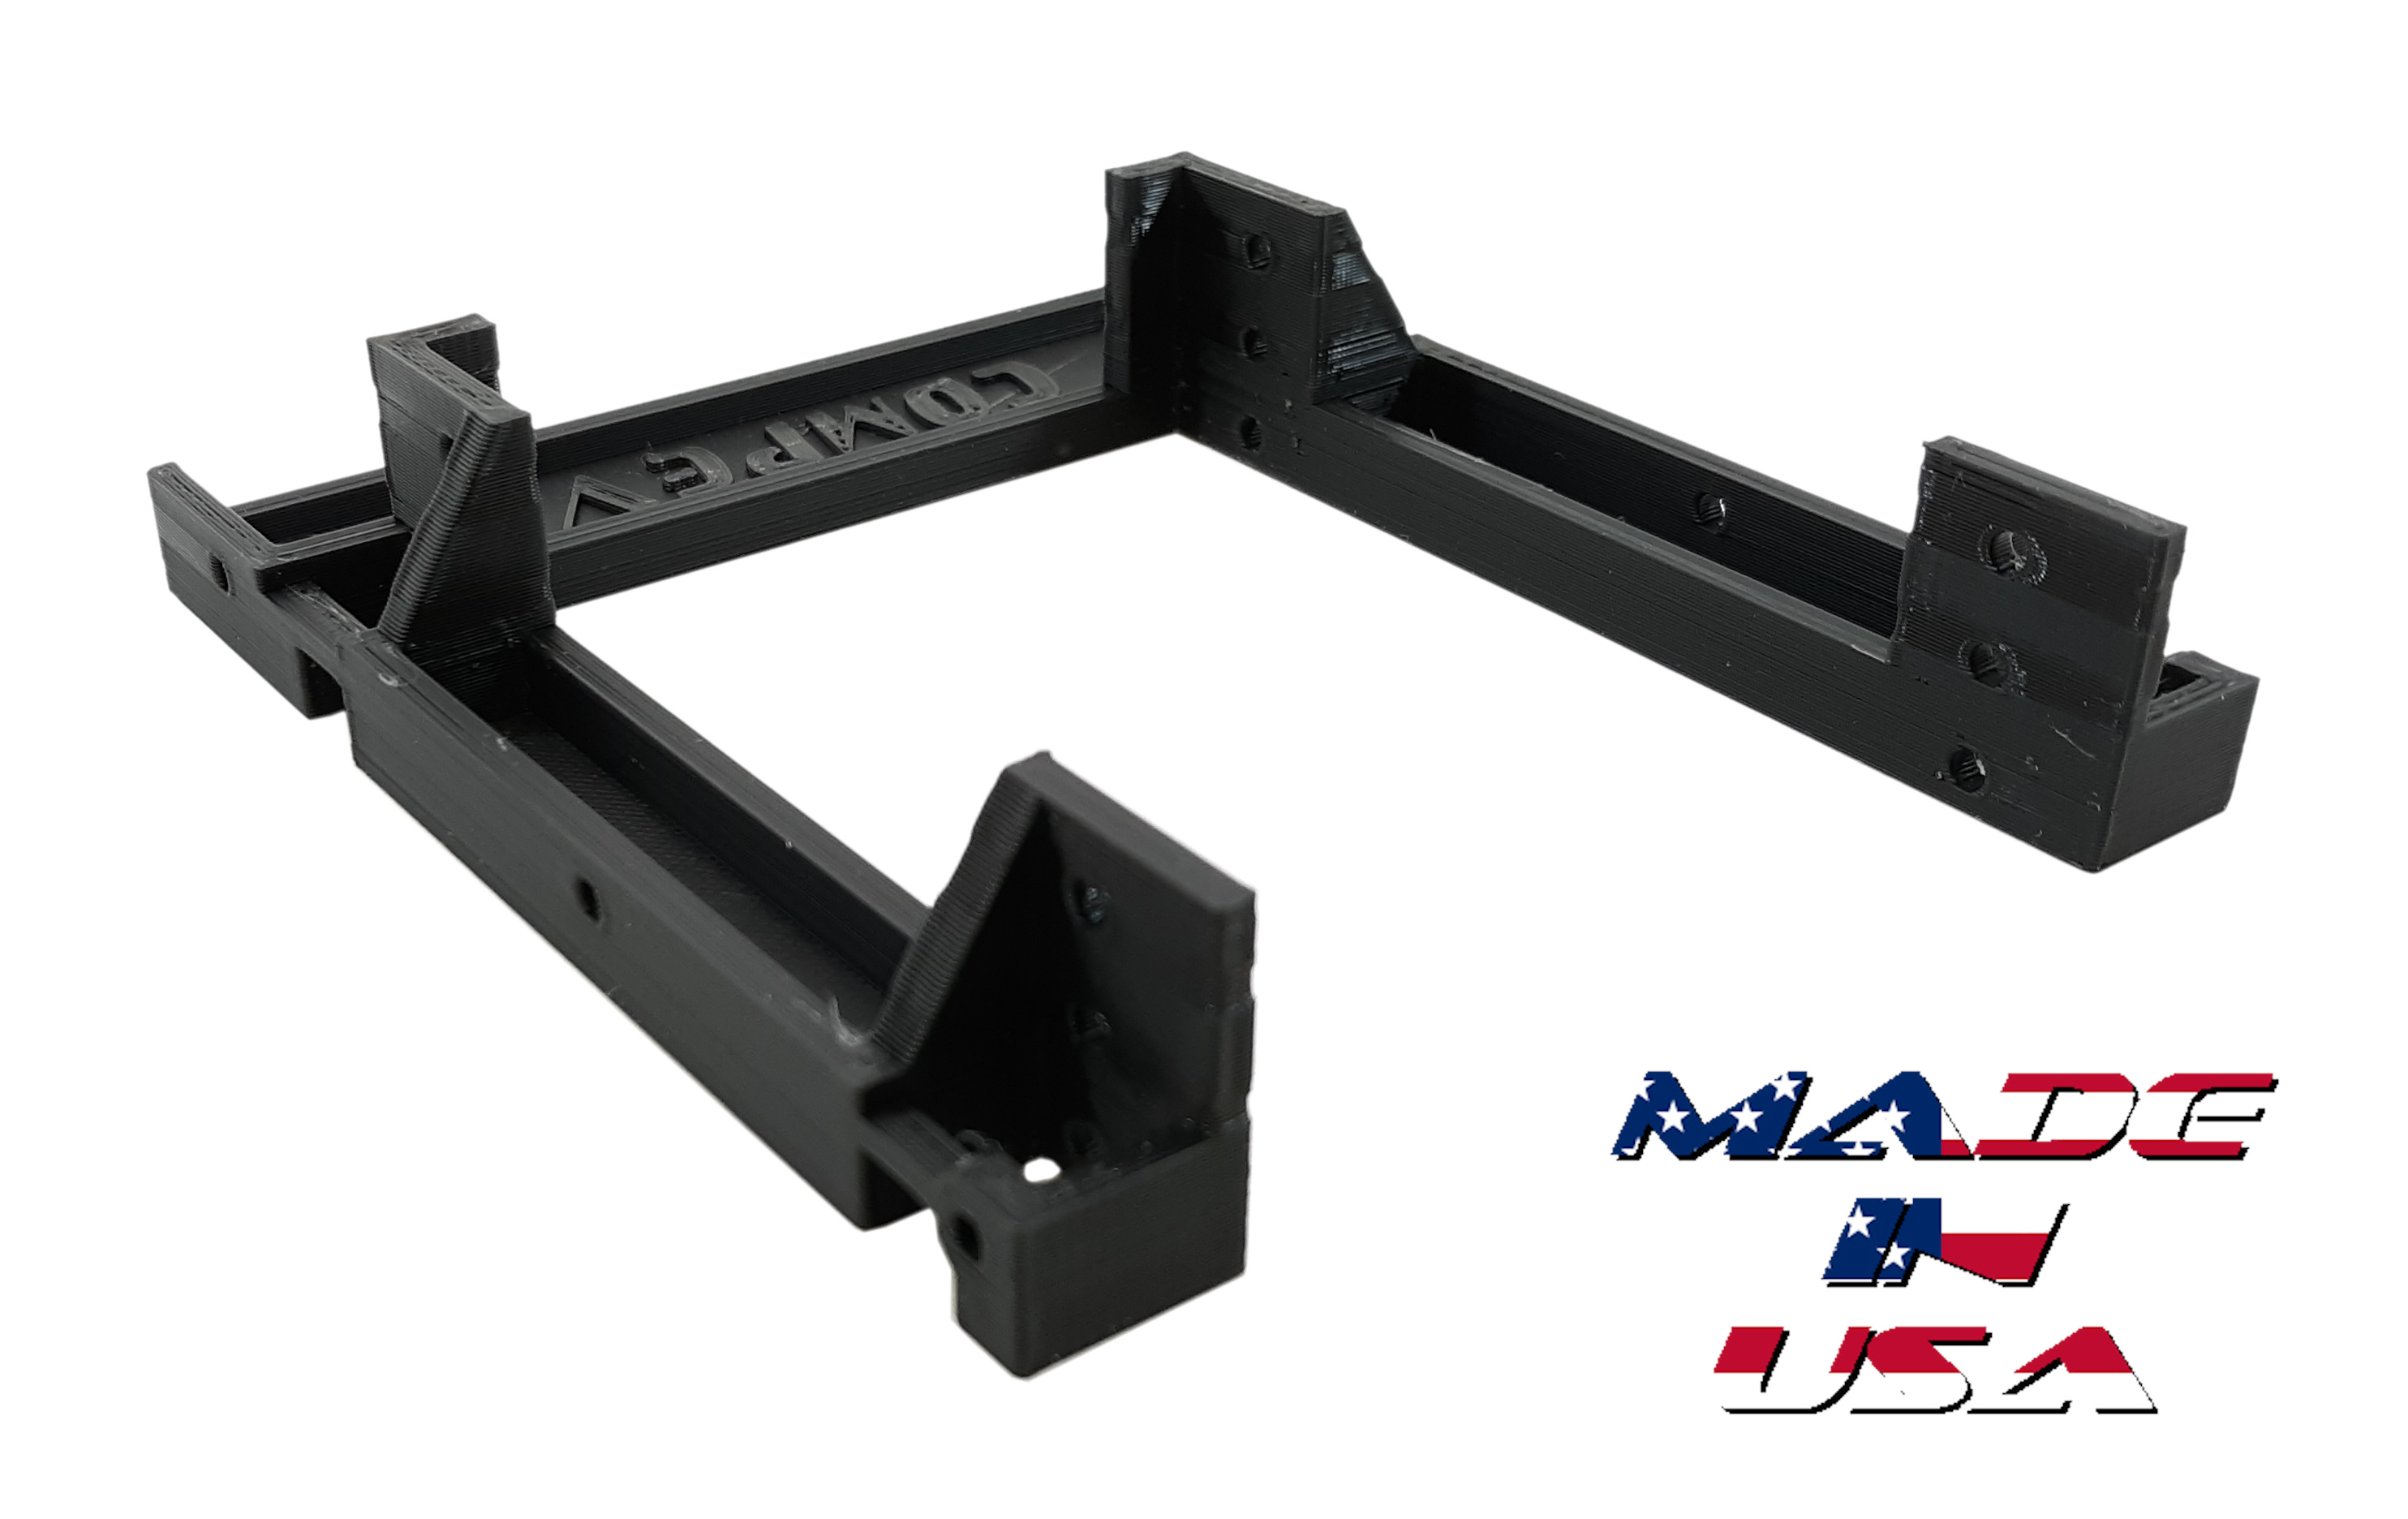 Compeve SSD Mounting Bracket 2.5" to 3.5" HDD Adapter Bay Tray for triple / dual / single SSD